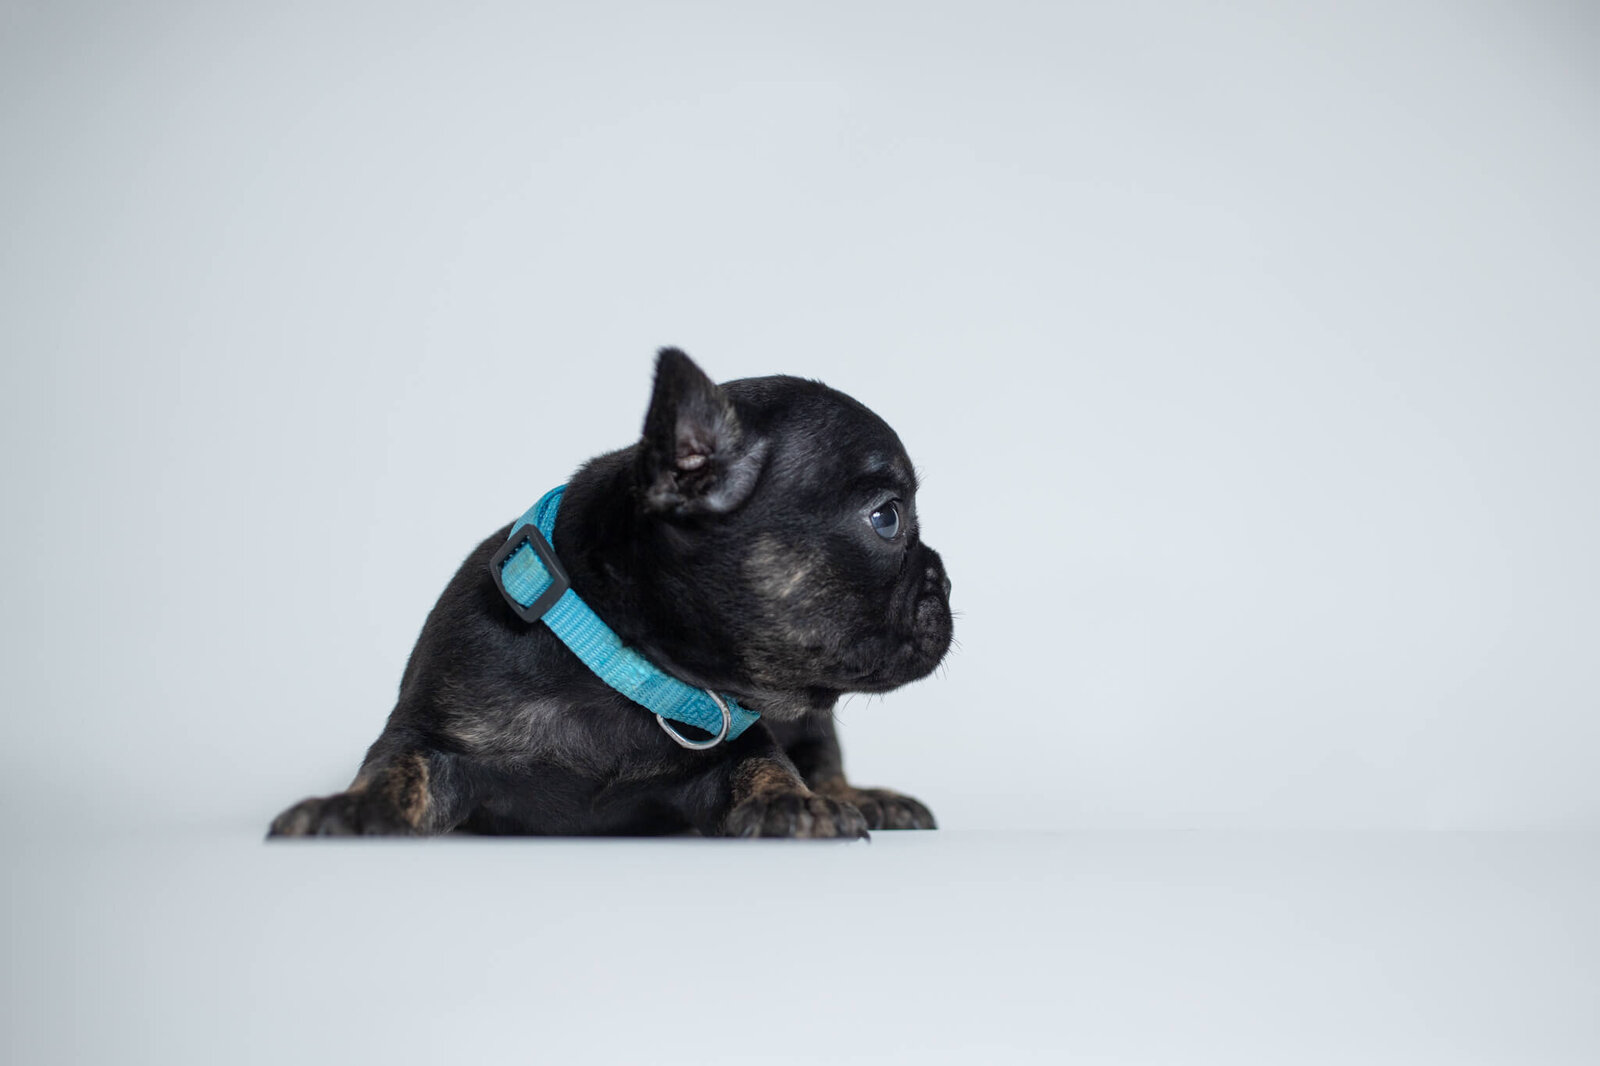 French Bulldog from a breeder litter wearing a blue collar looking right